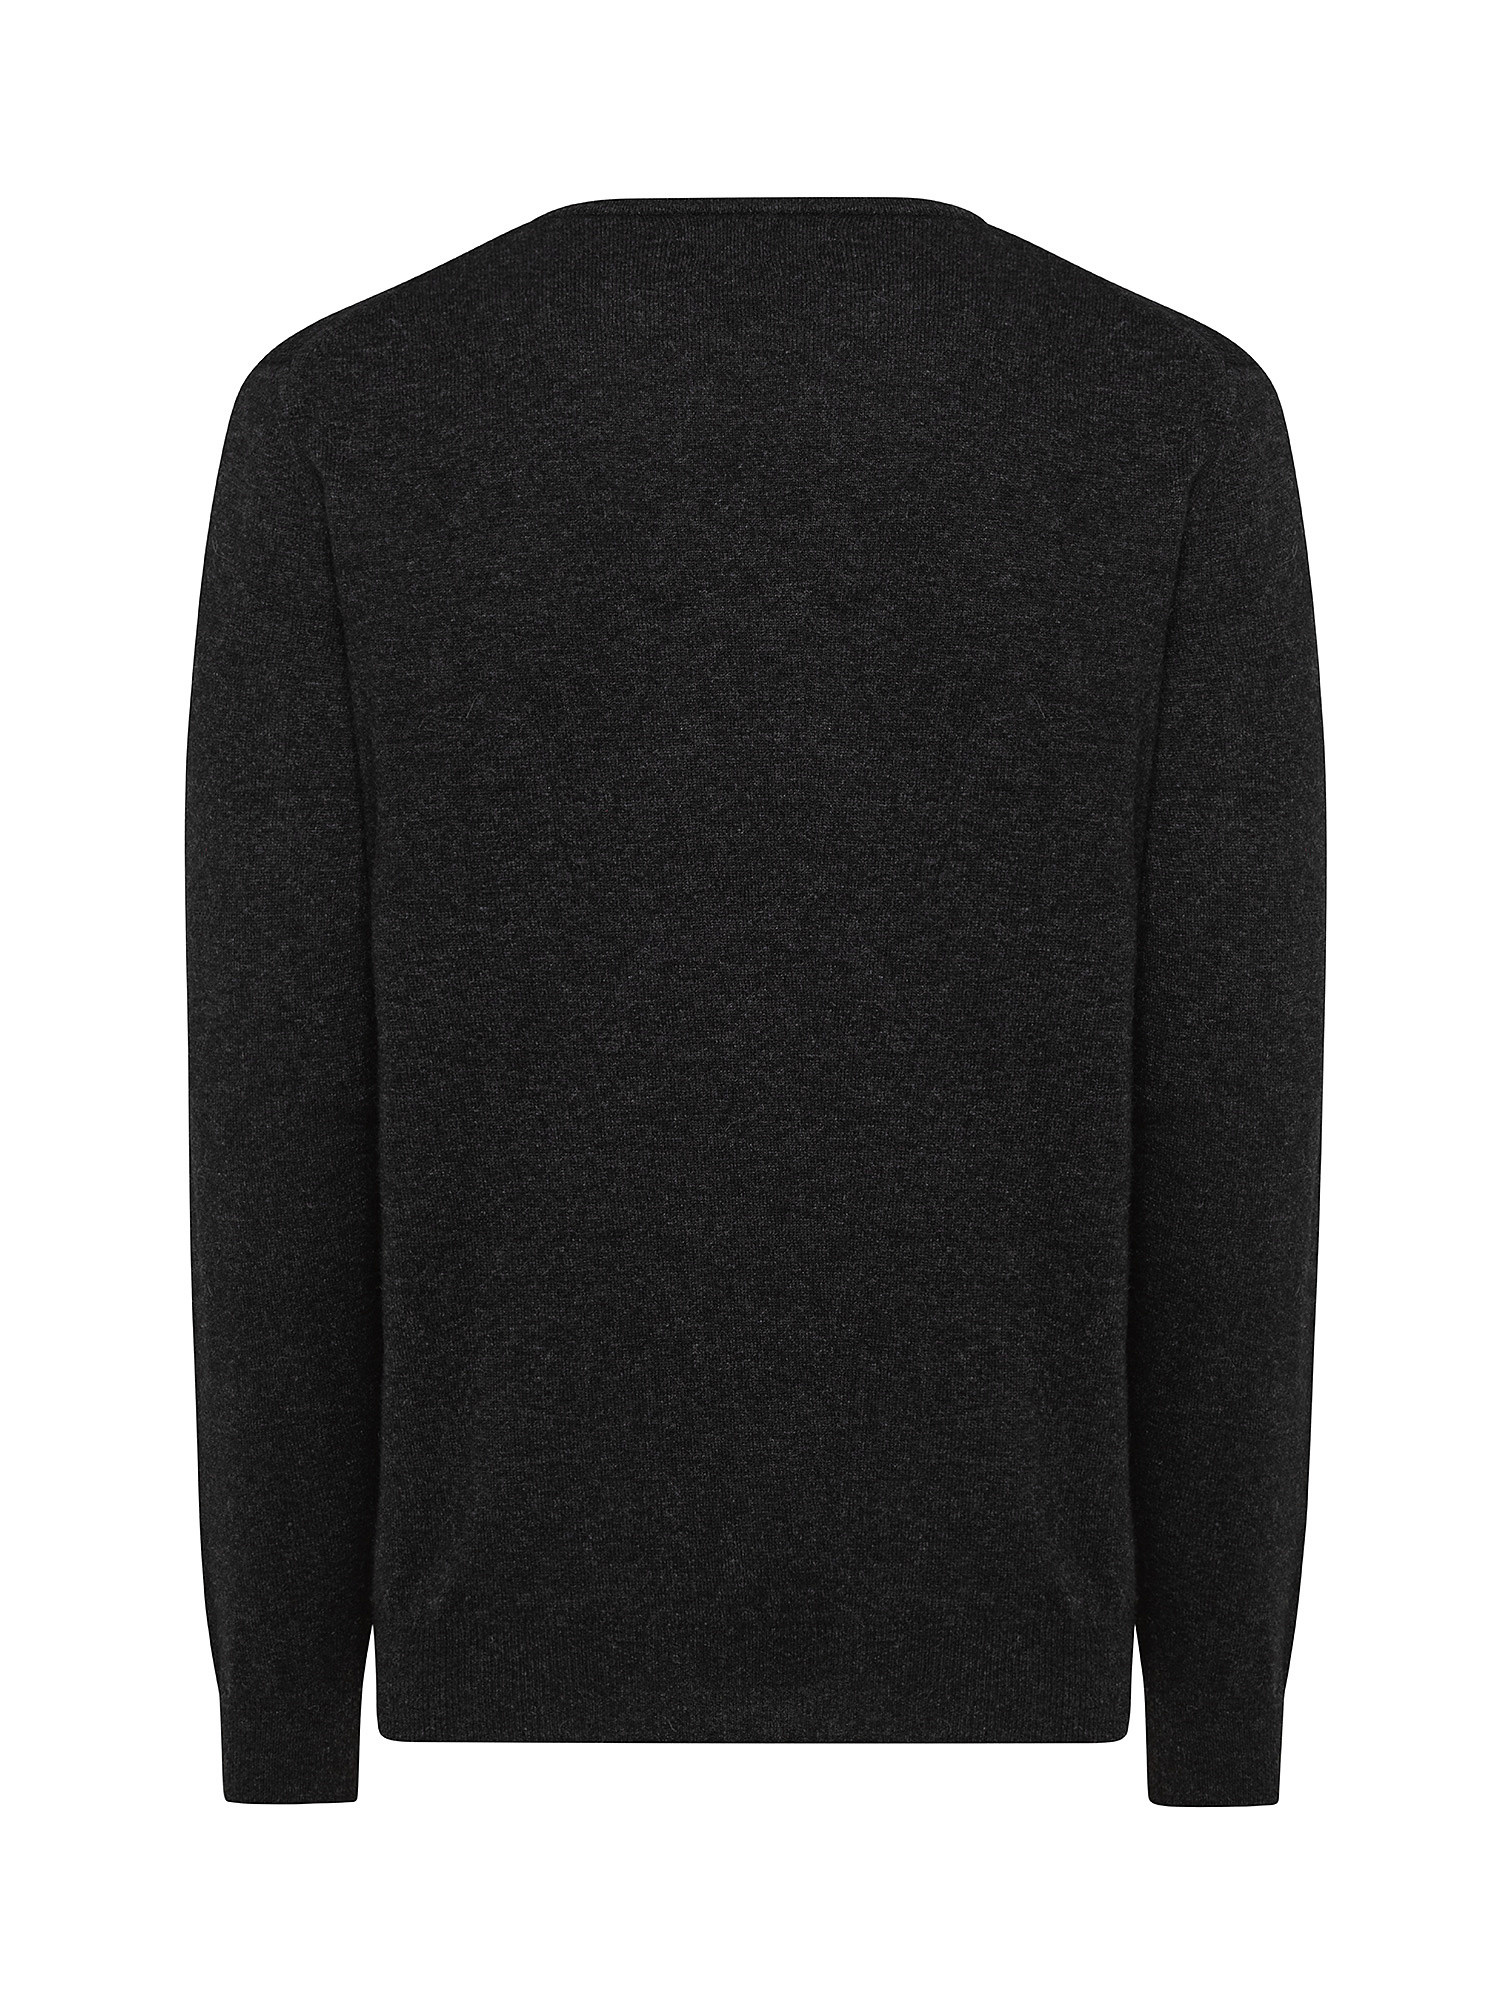 Cashmere Blend crewneck sweater with noble fibers, Anthracite, large image number 1